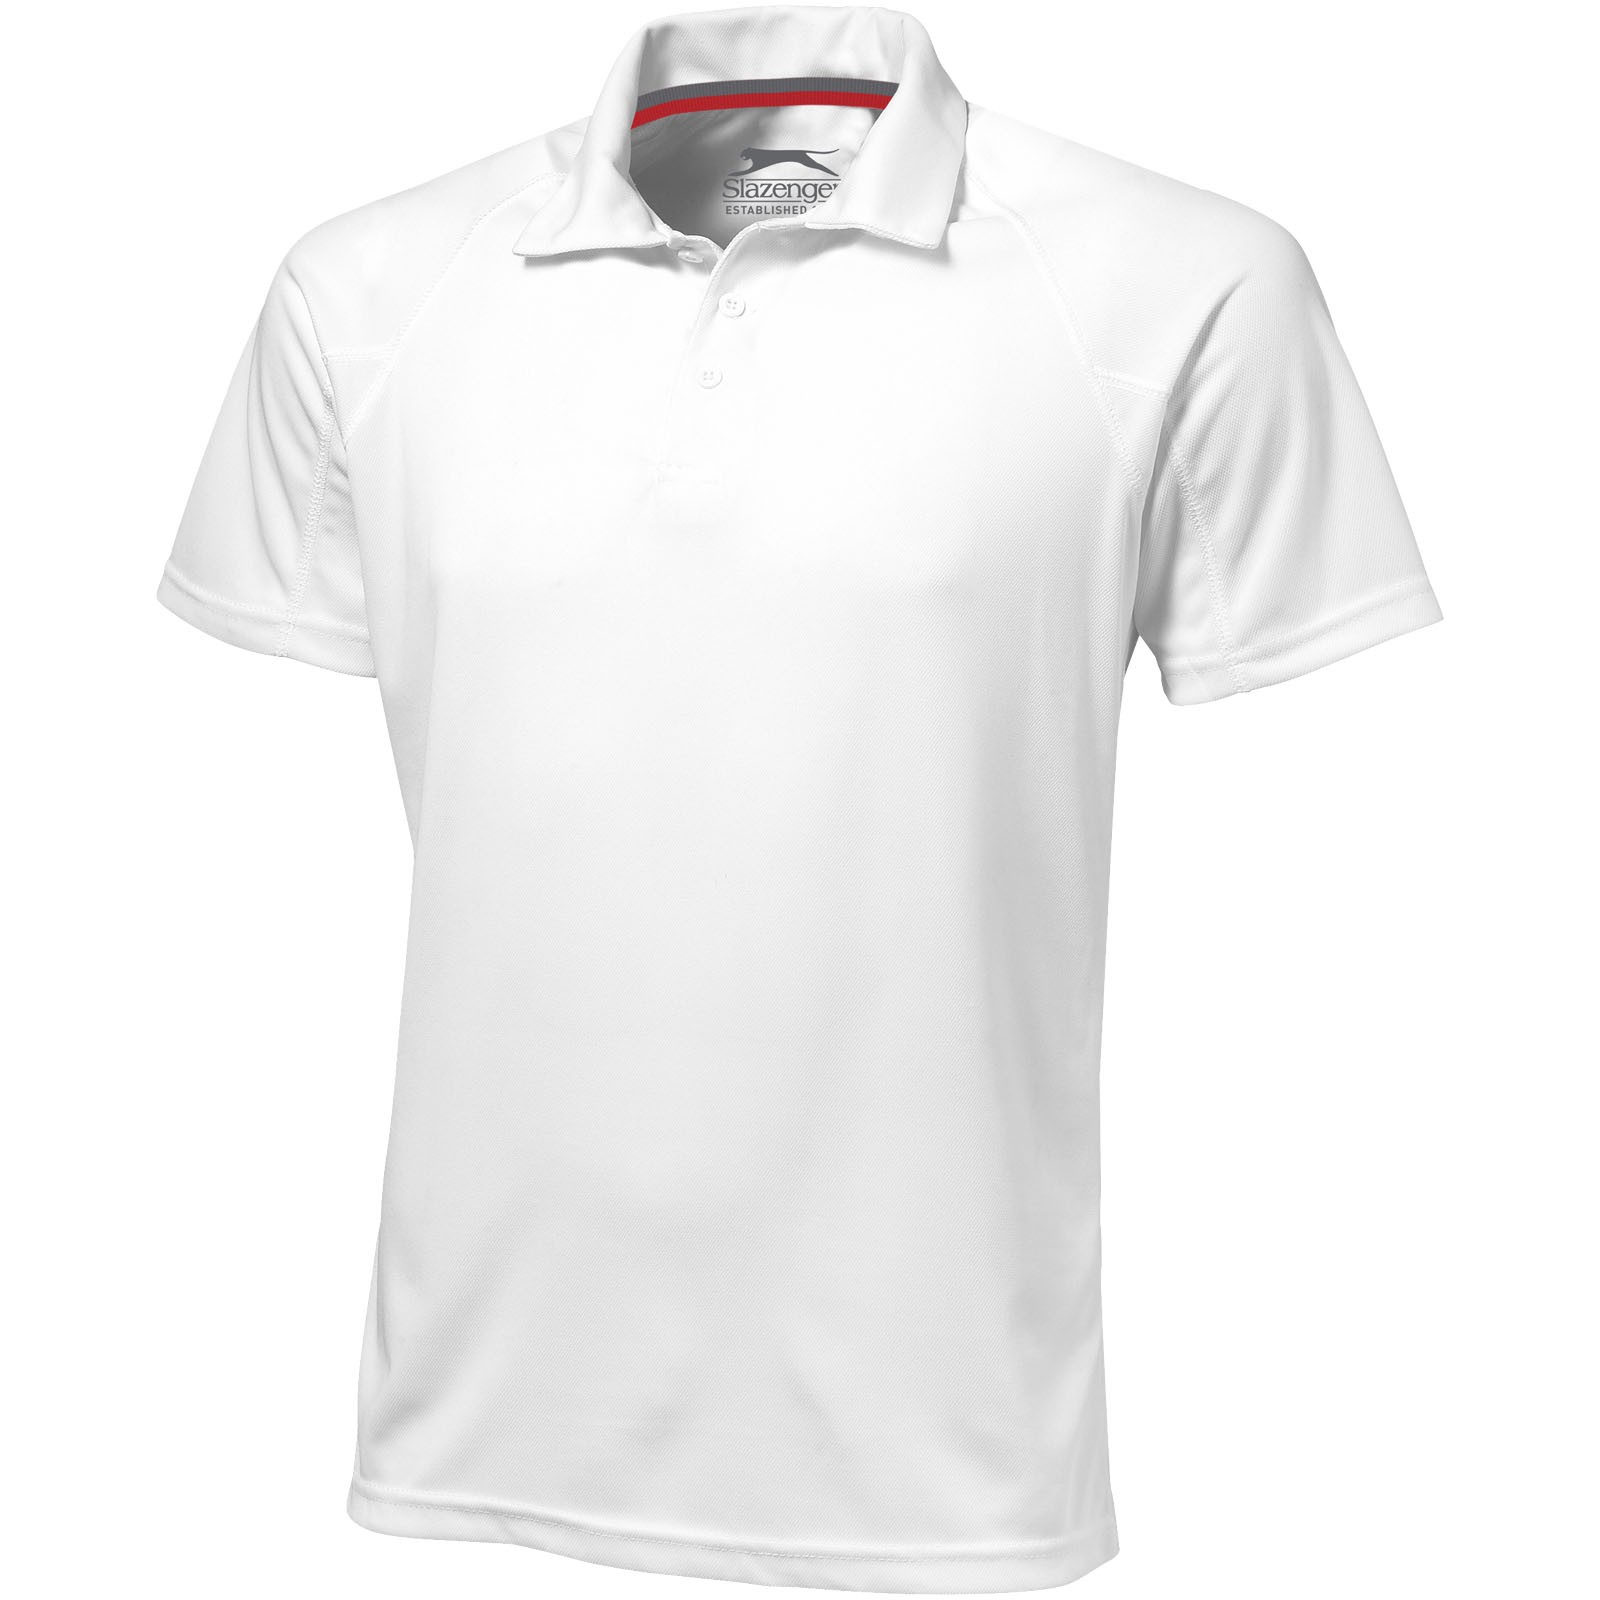 Game short sleeve men's cool fit polo - White / XXL